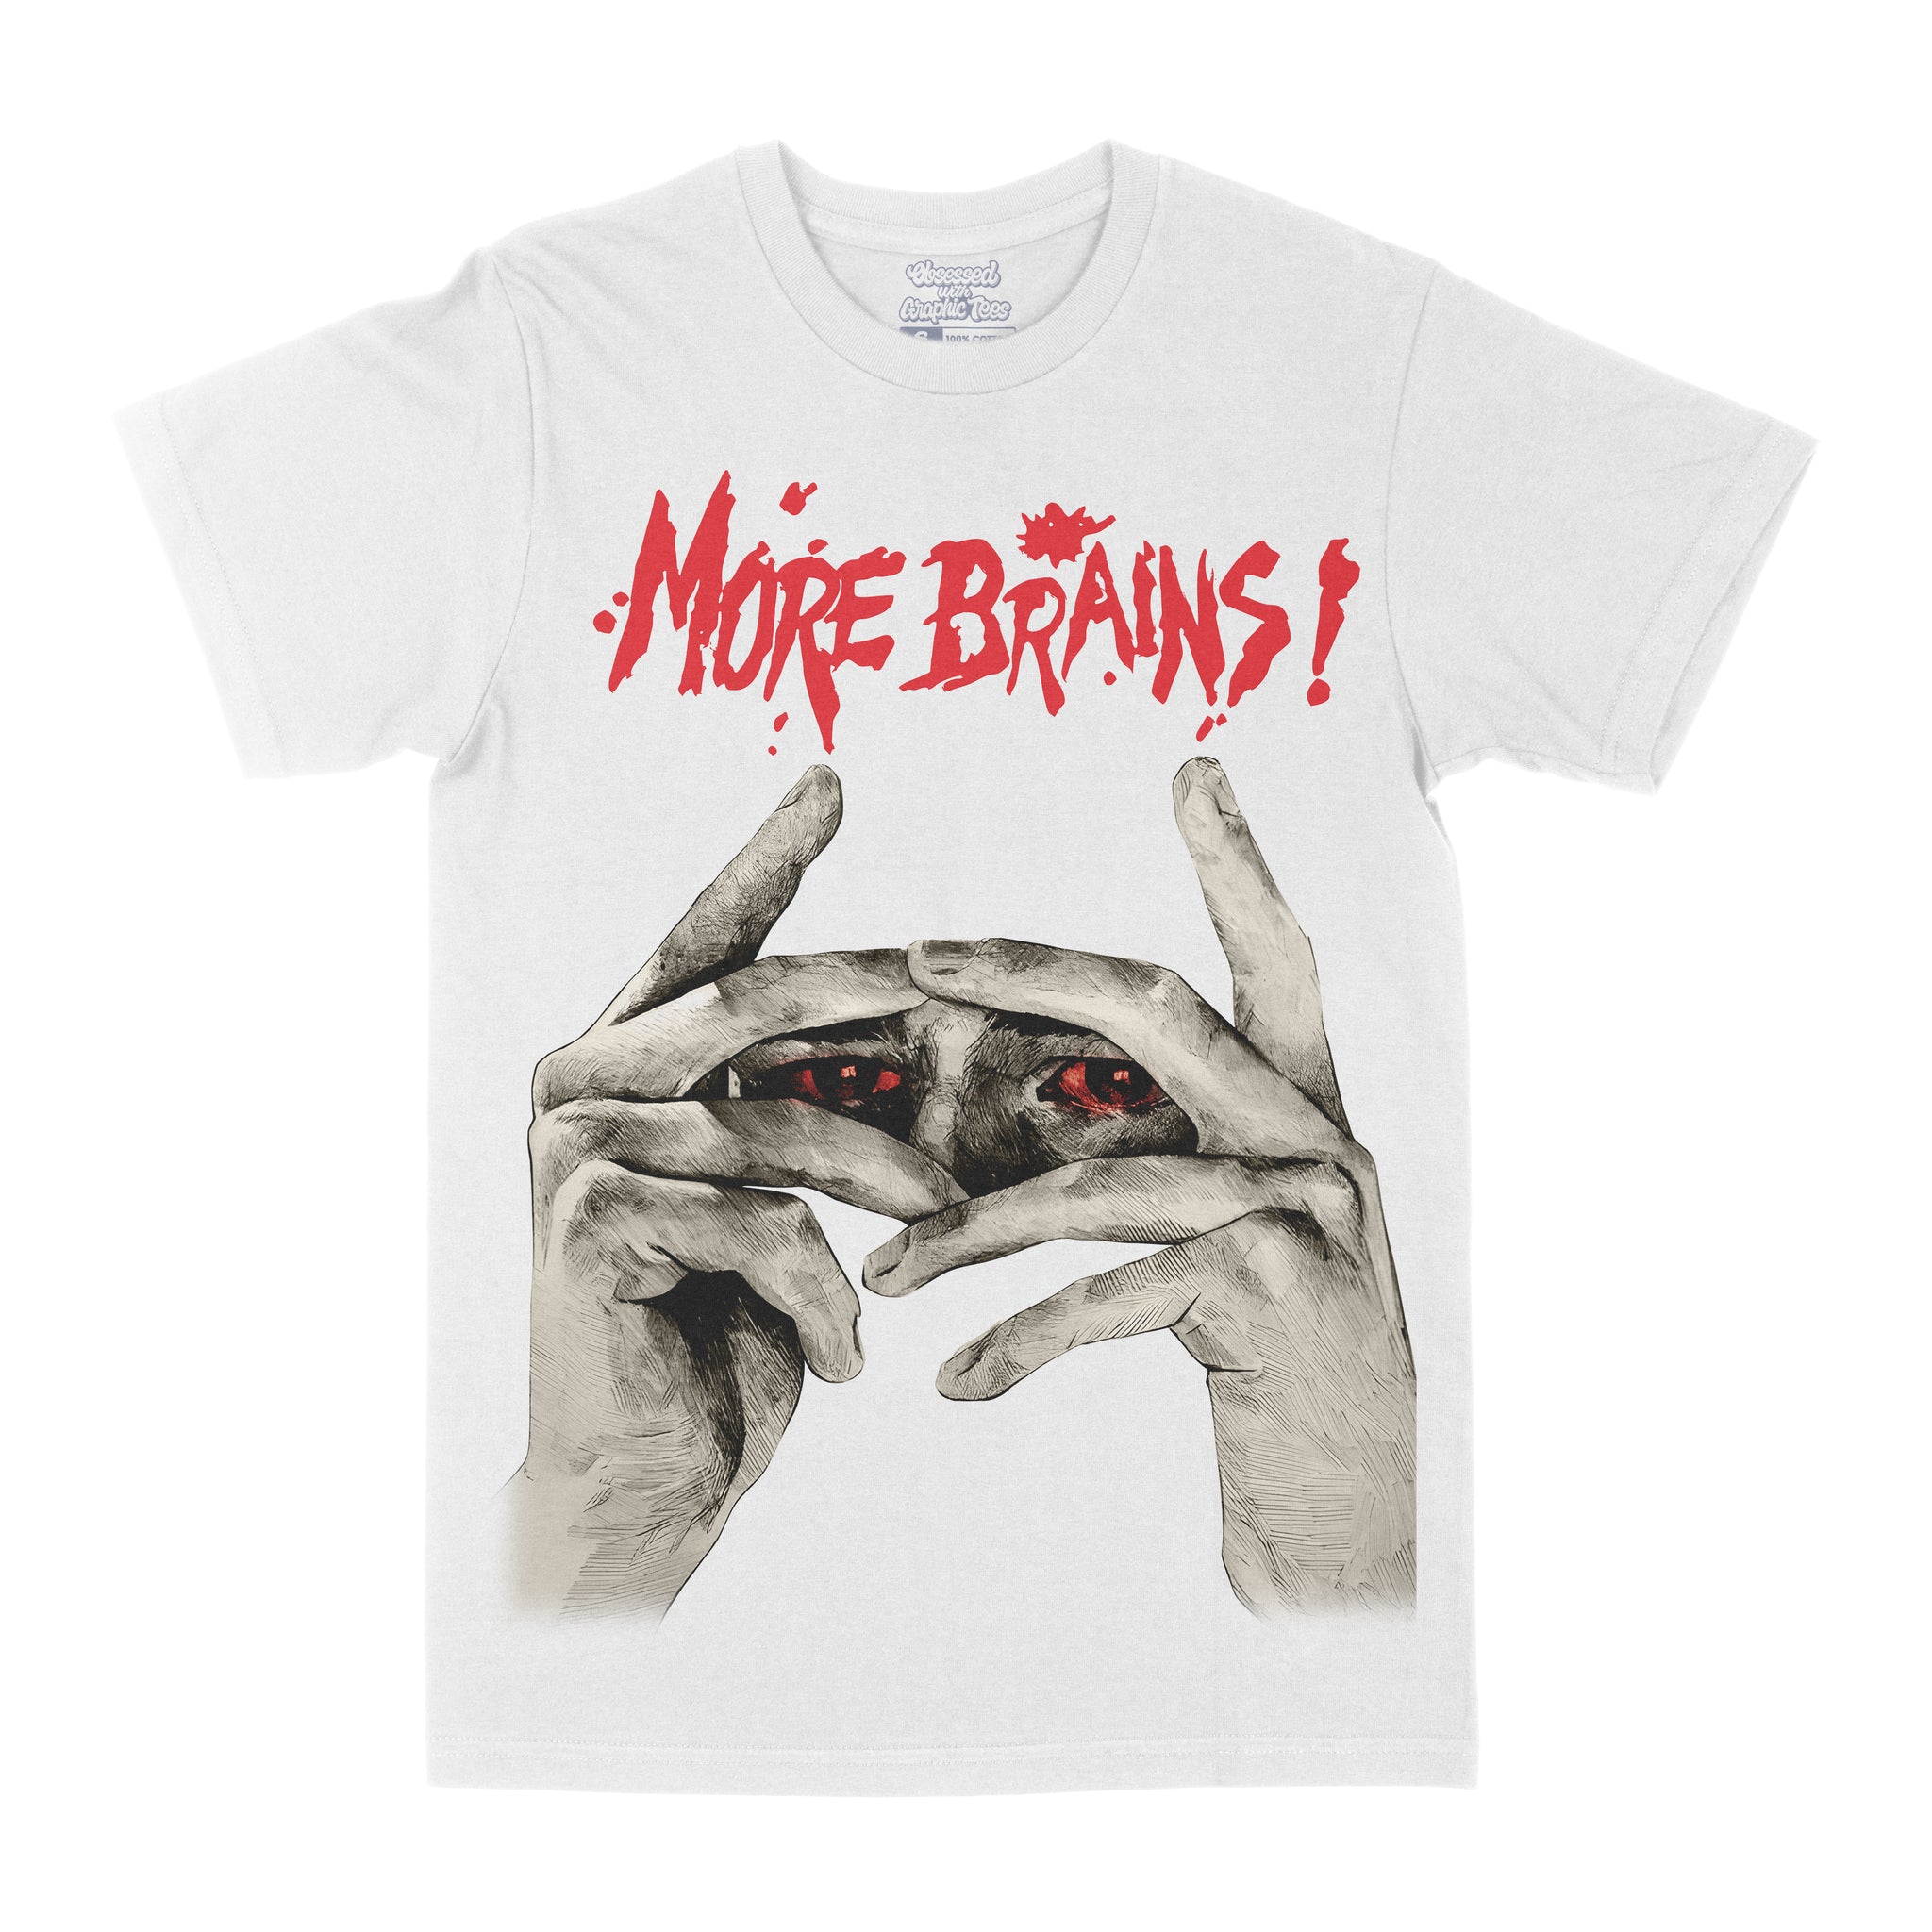 More Brains Graphic Tee